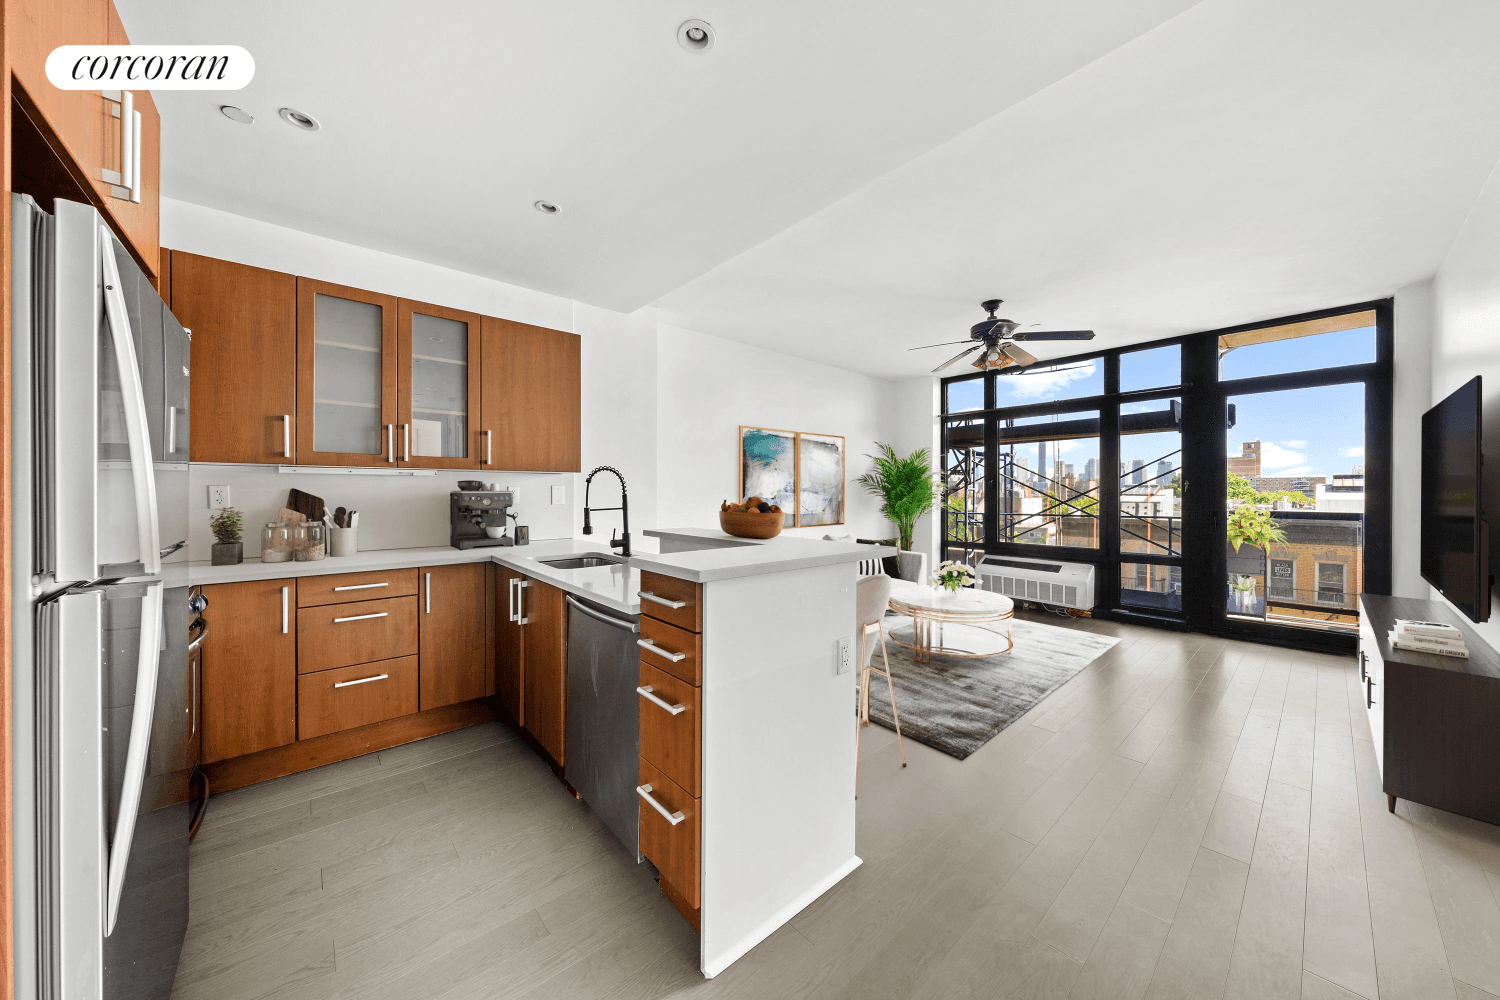 Welcome home to 162 16th Street, where contemporary style and unobstructed Manhattan views create this beautiful home in the sky.